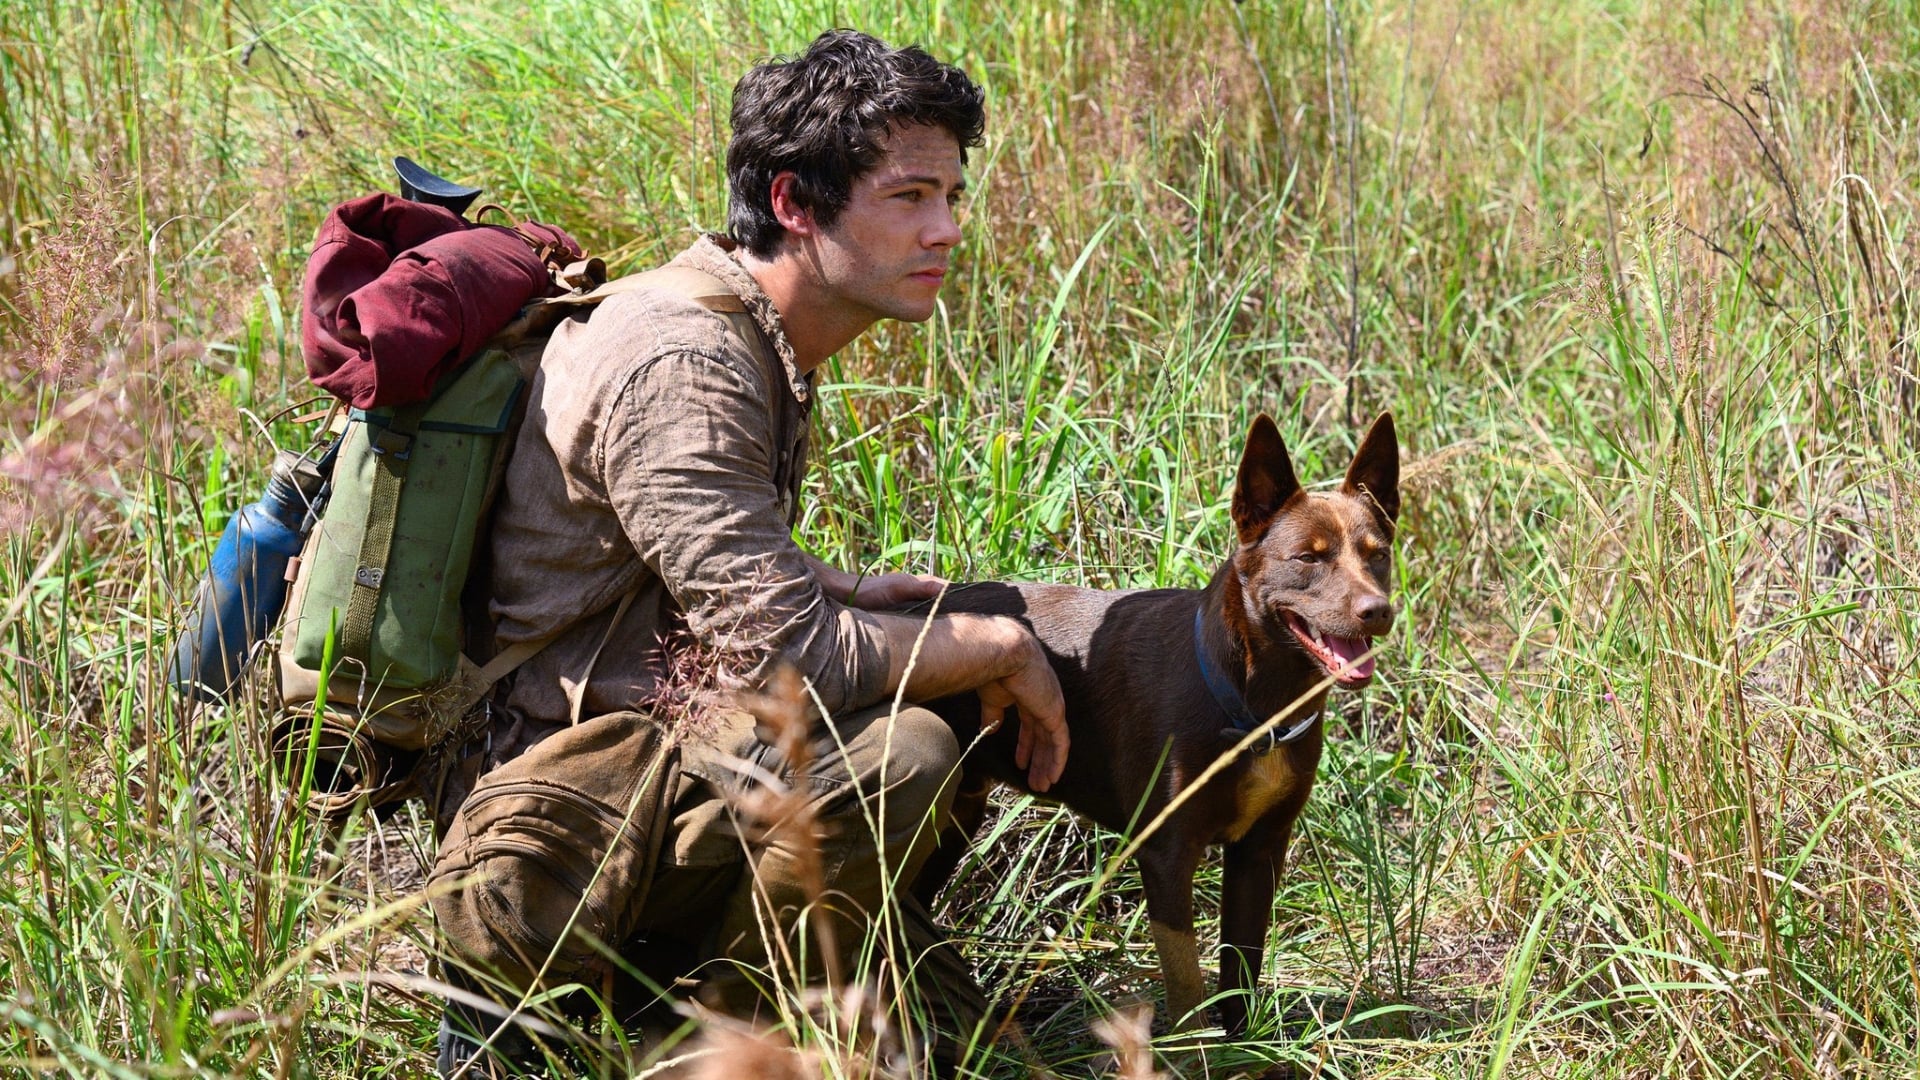 Screenshot from the film Love and Monsters. A young man with survival gear kneels in the tall grass with a brown dog. 